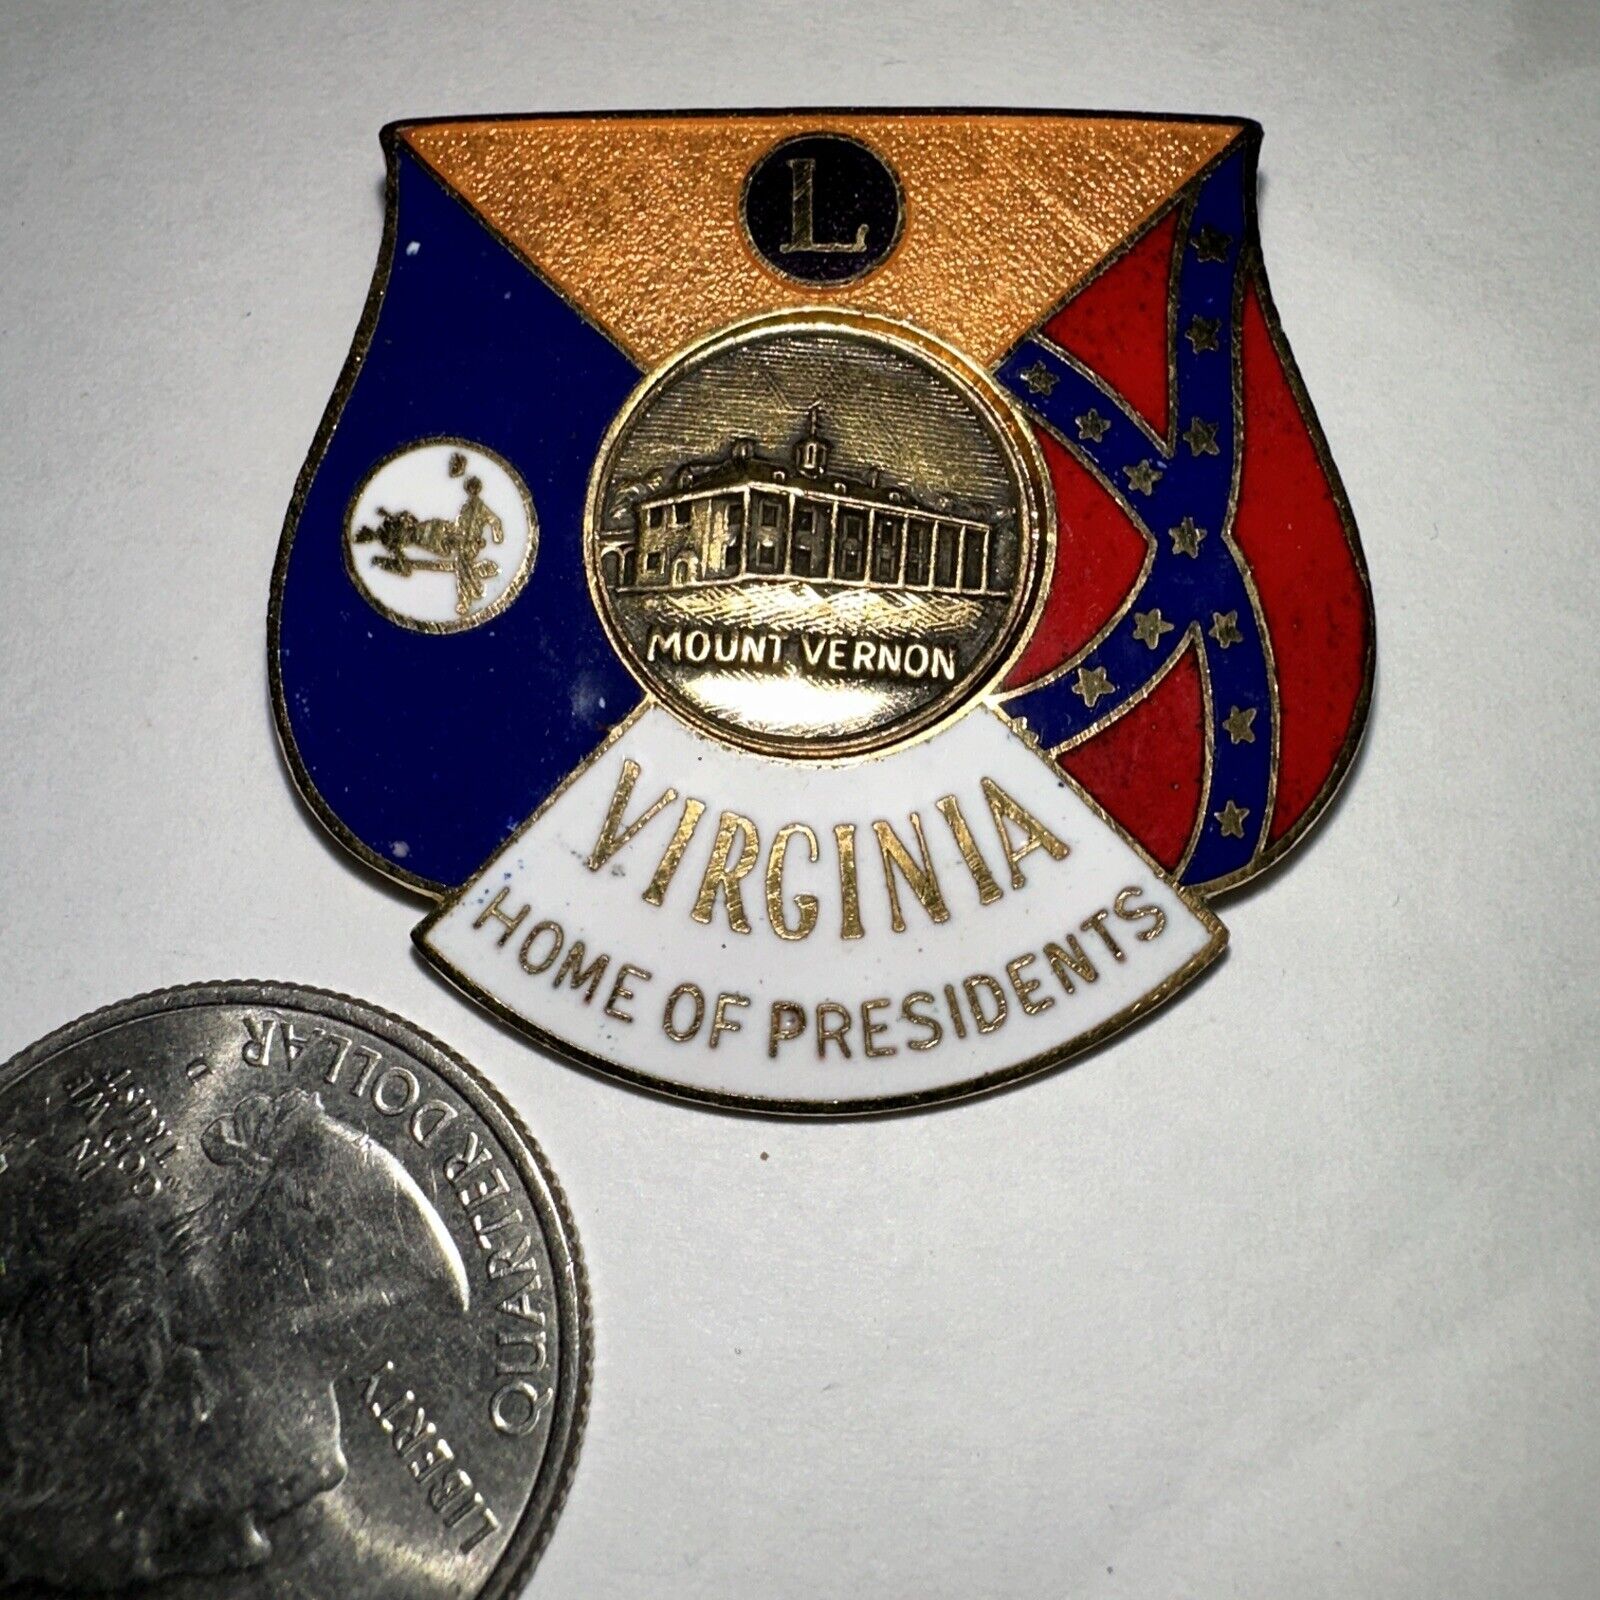 1970 Prestige Mount Vernon Virginia Home Of Presidents MD-24 Lions Club Pin